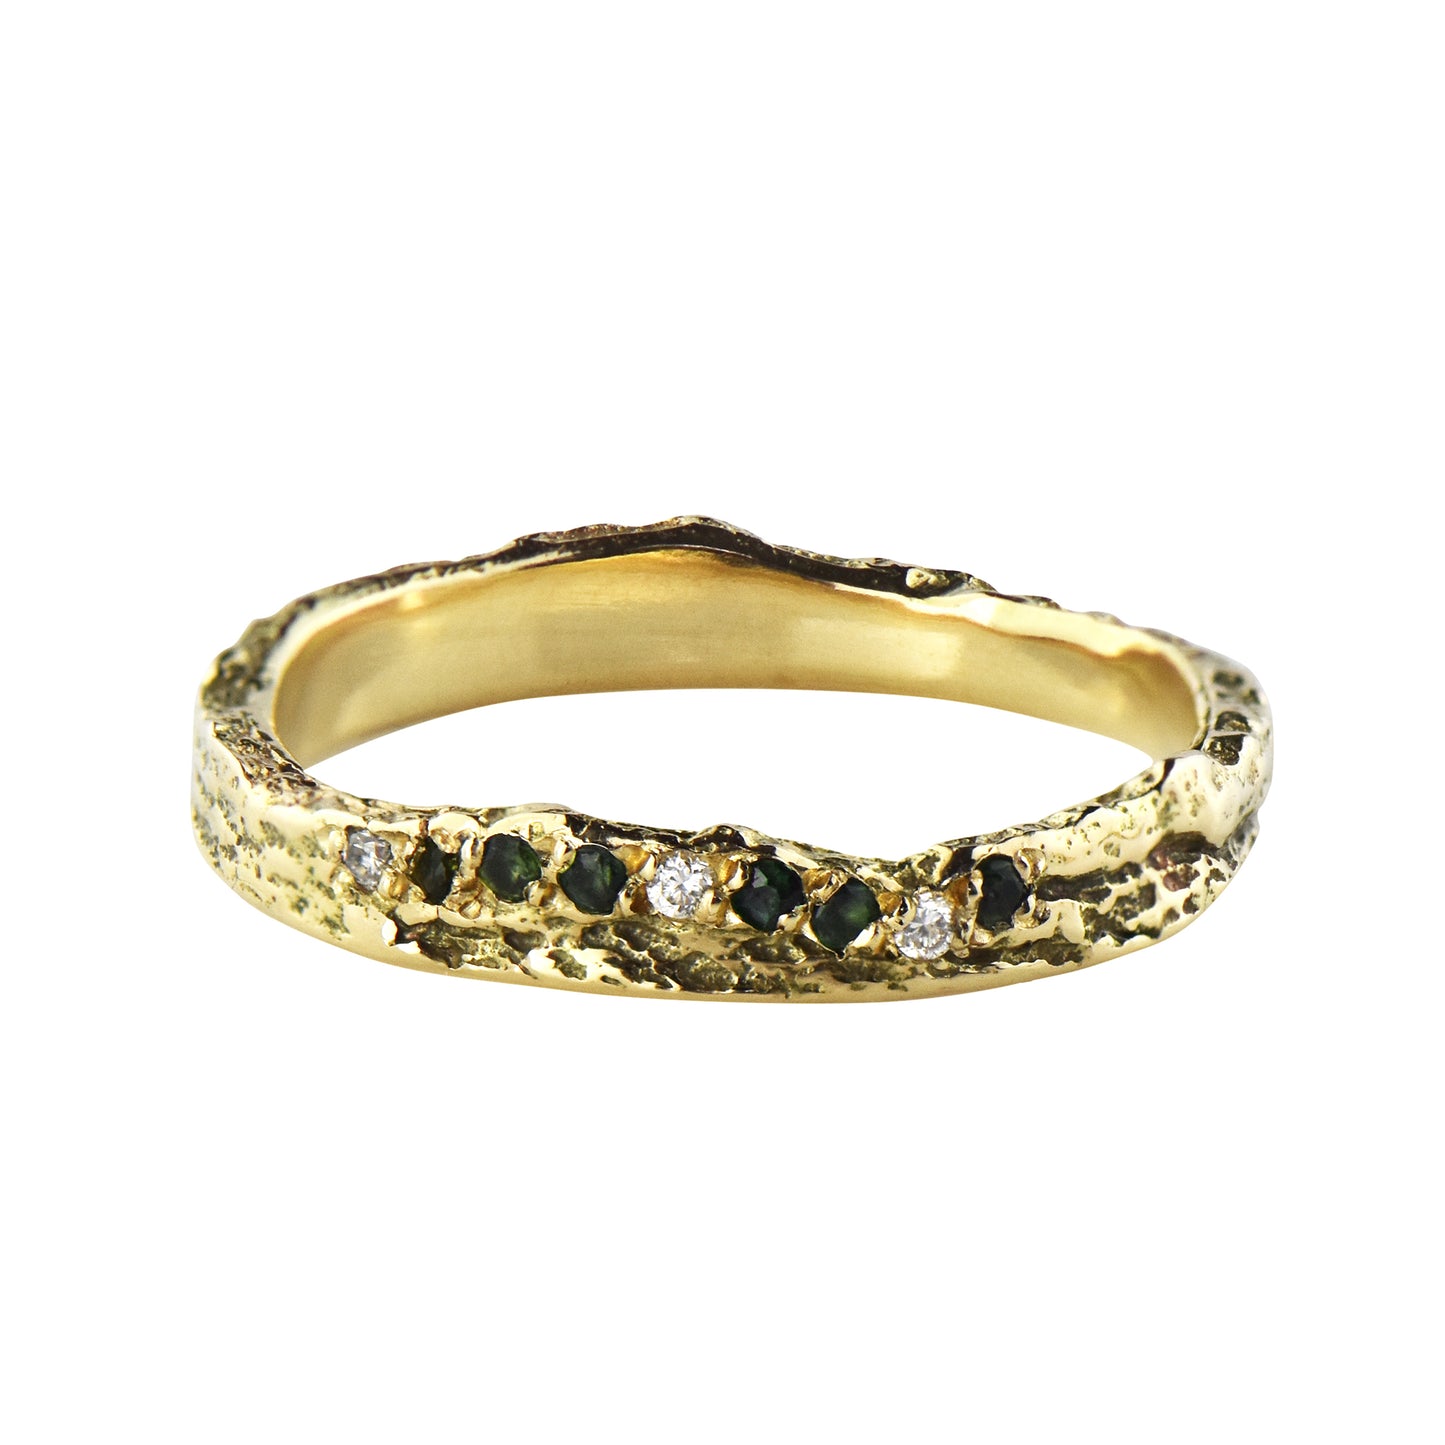 14ct Gold Skinny London Plane Ring with Diamonds and Tourmalines